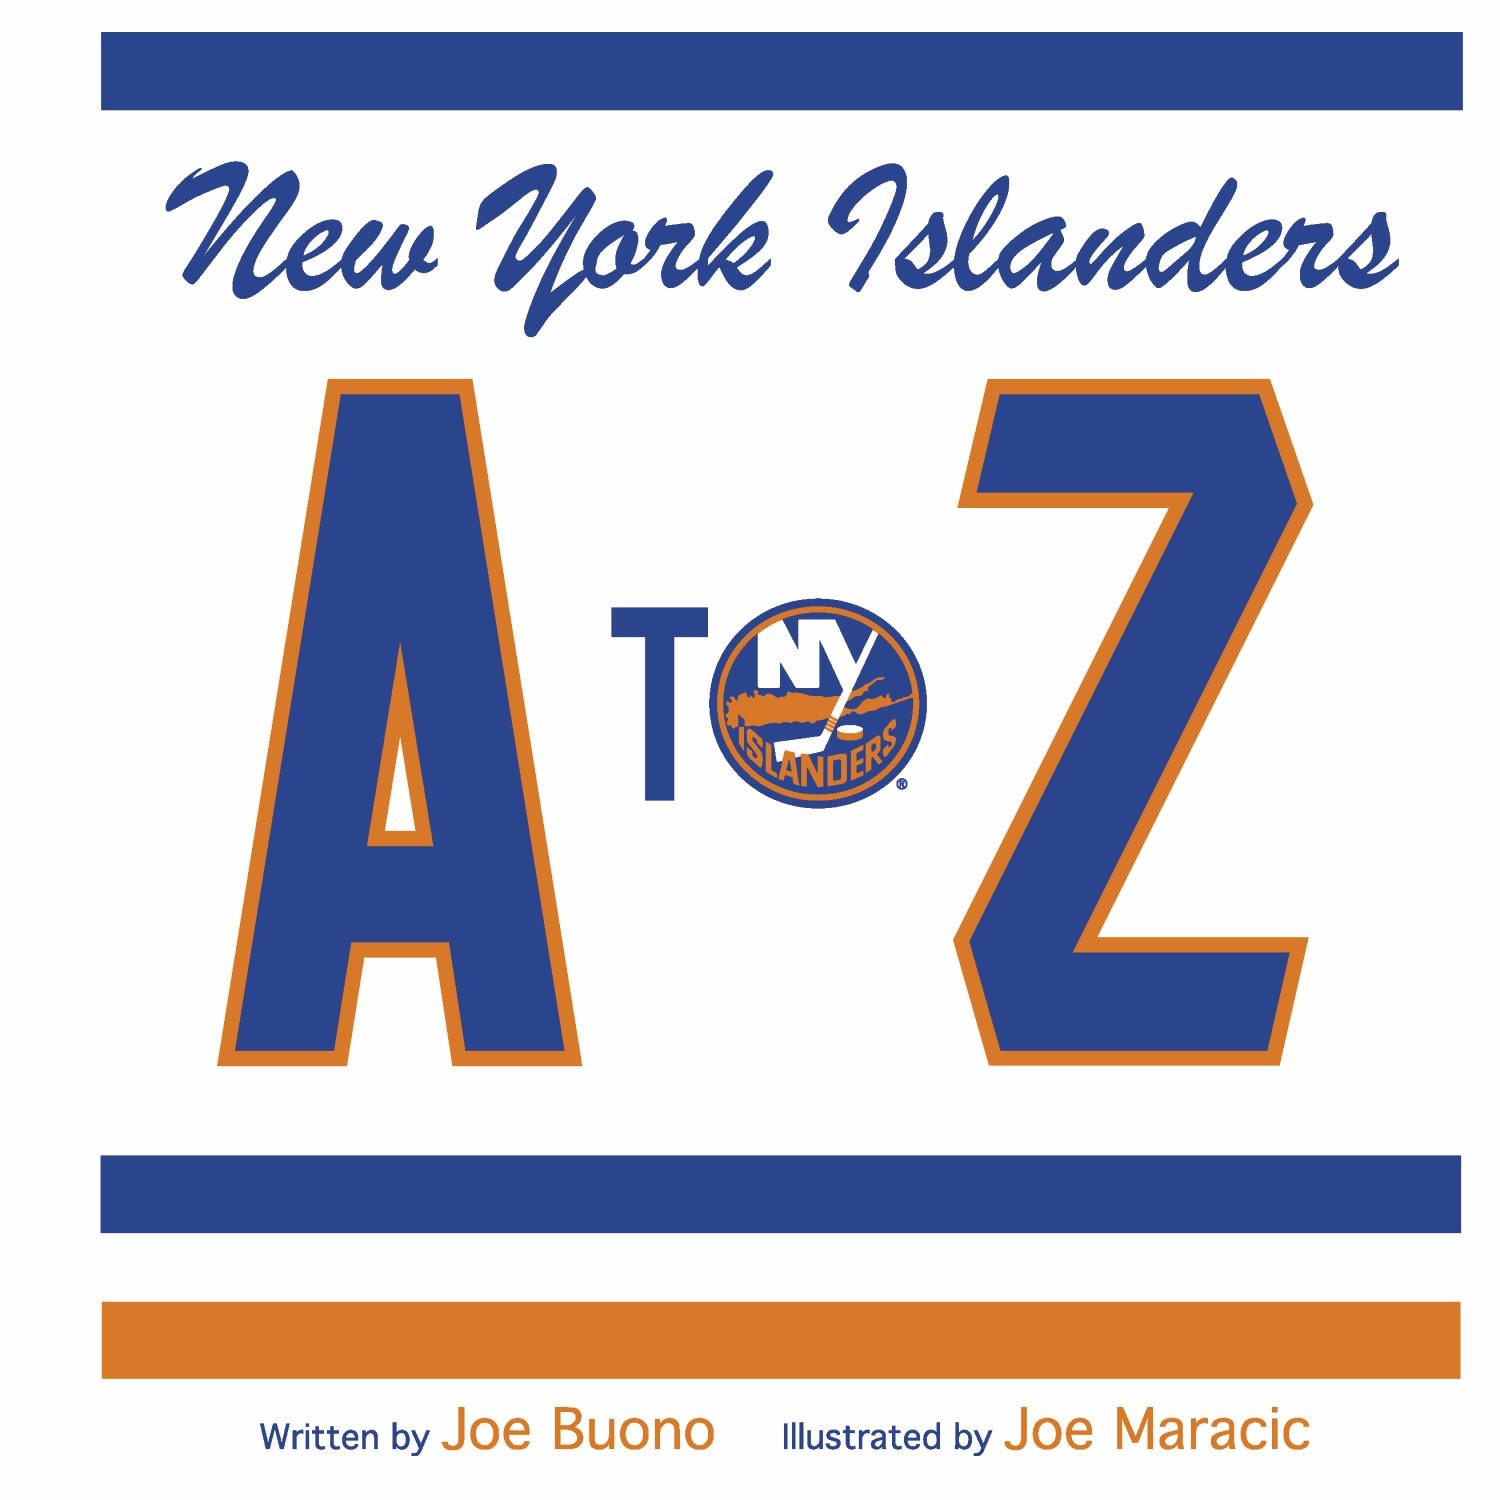 The NY Islanders' inspiration for their team store